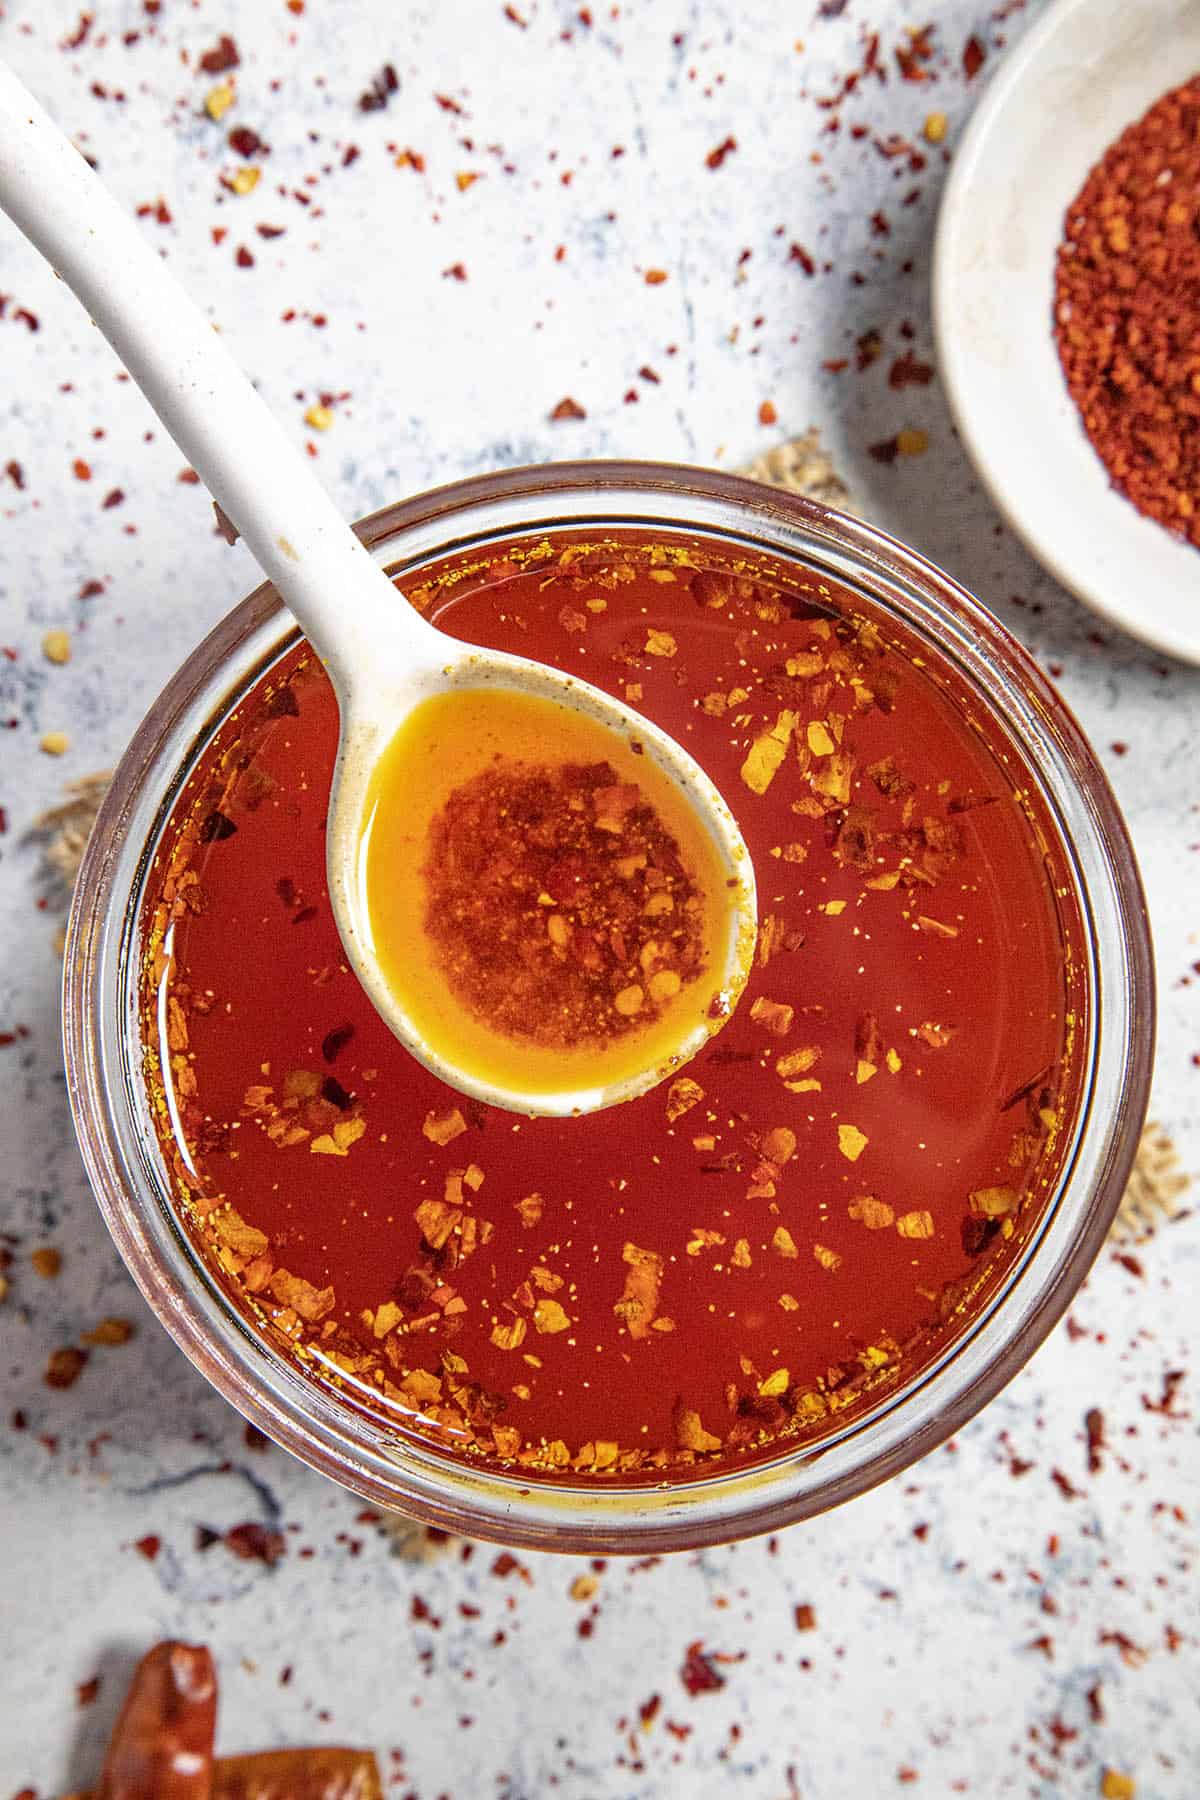 Homemade chili oil on a spoon